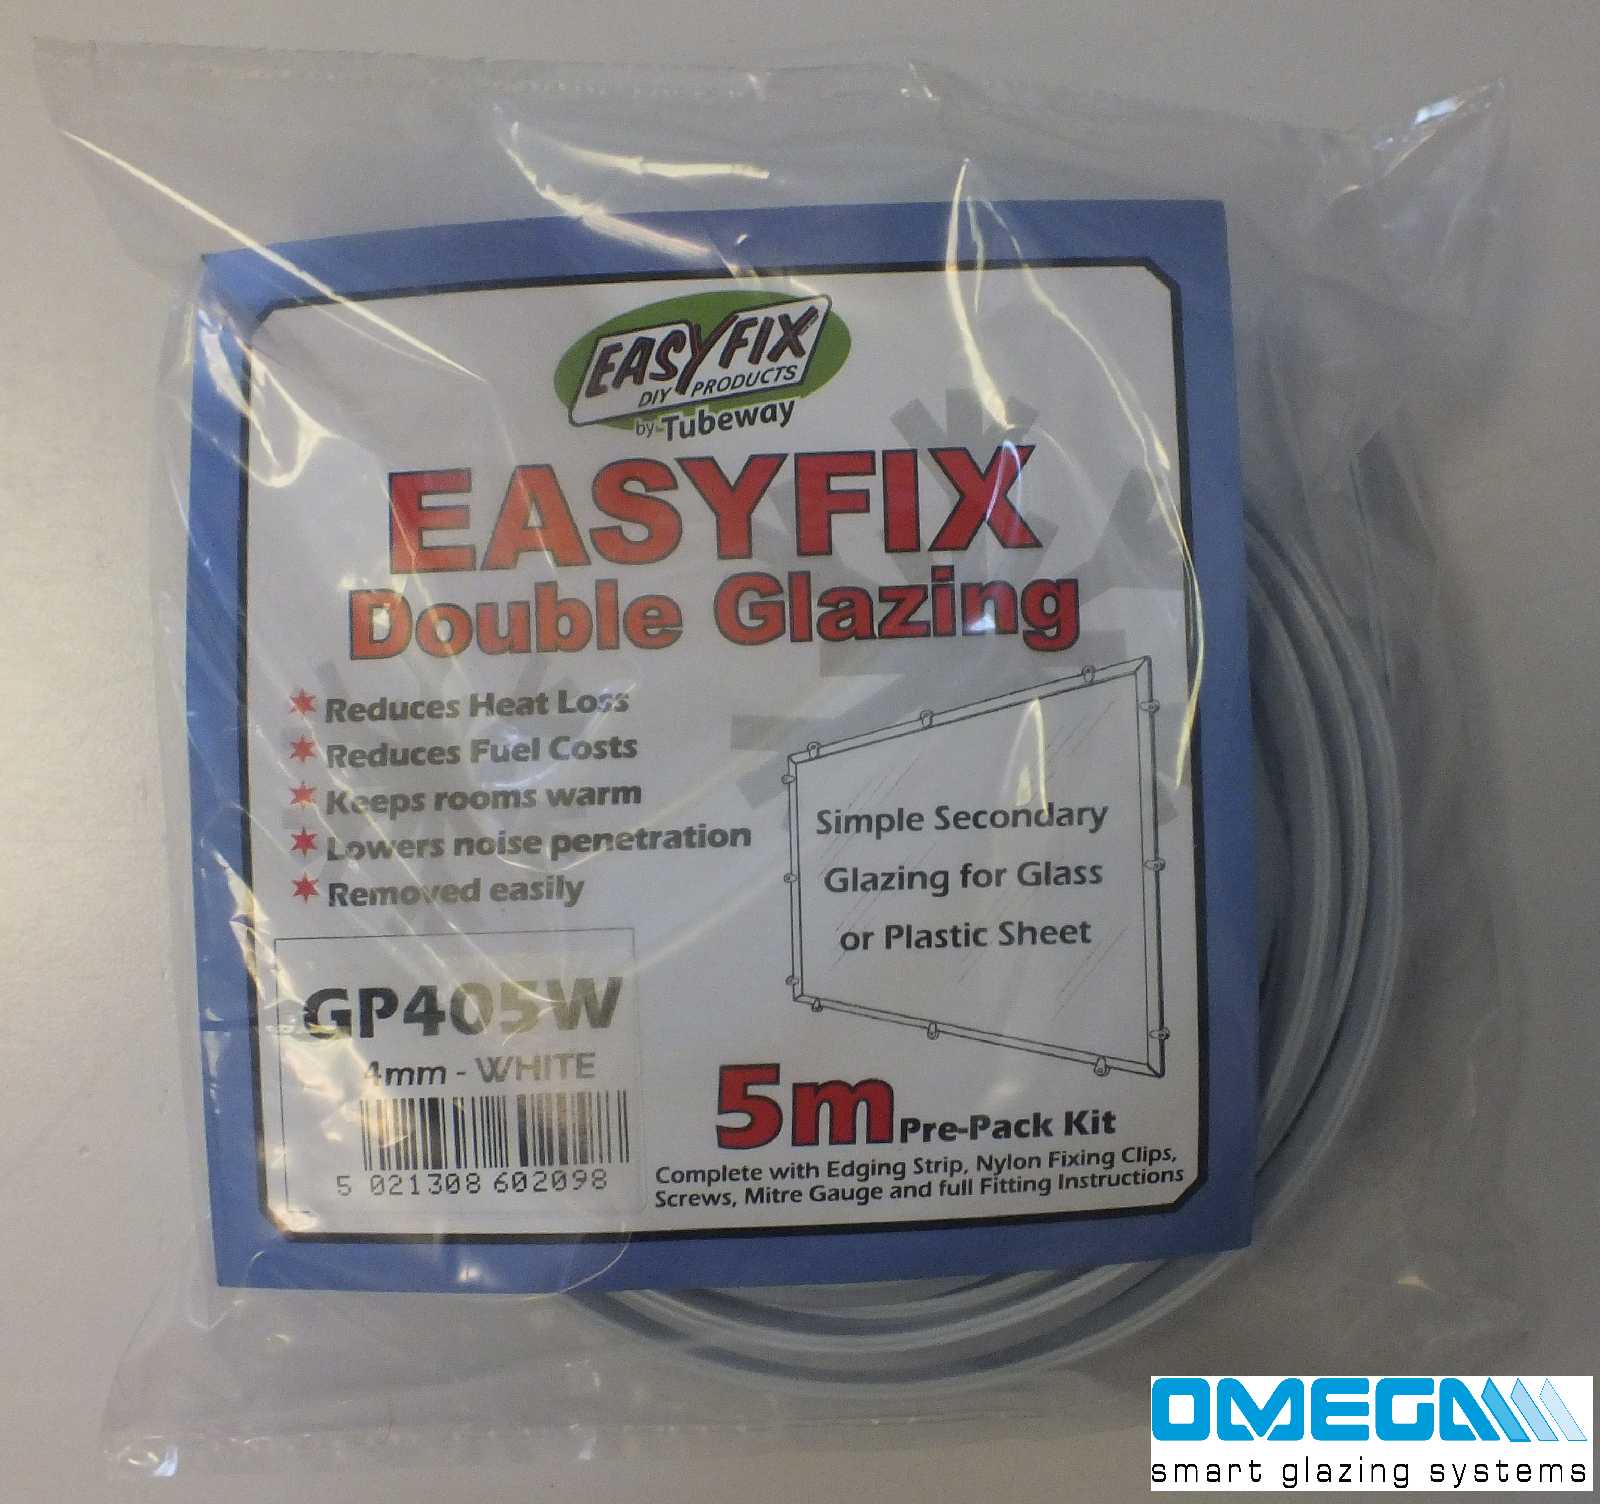 Easyfix Clipglaze Edging Kit - 5m roll of edging for 4mm Glazing Thickness, Clear